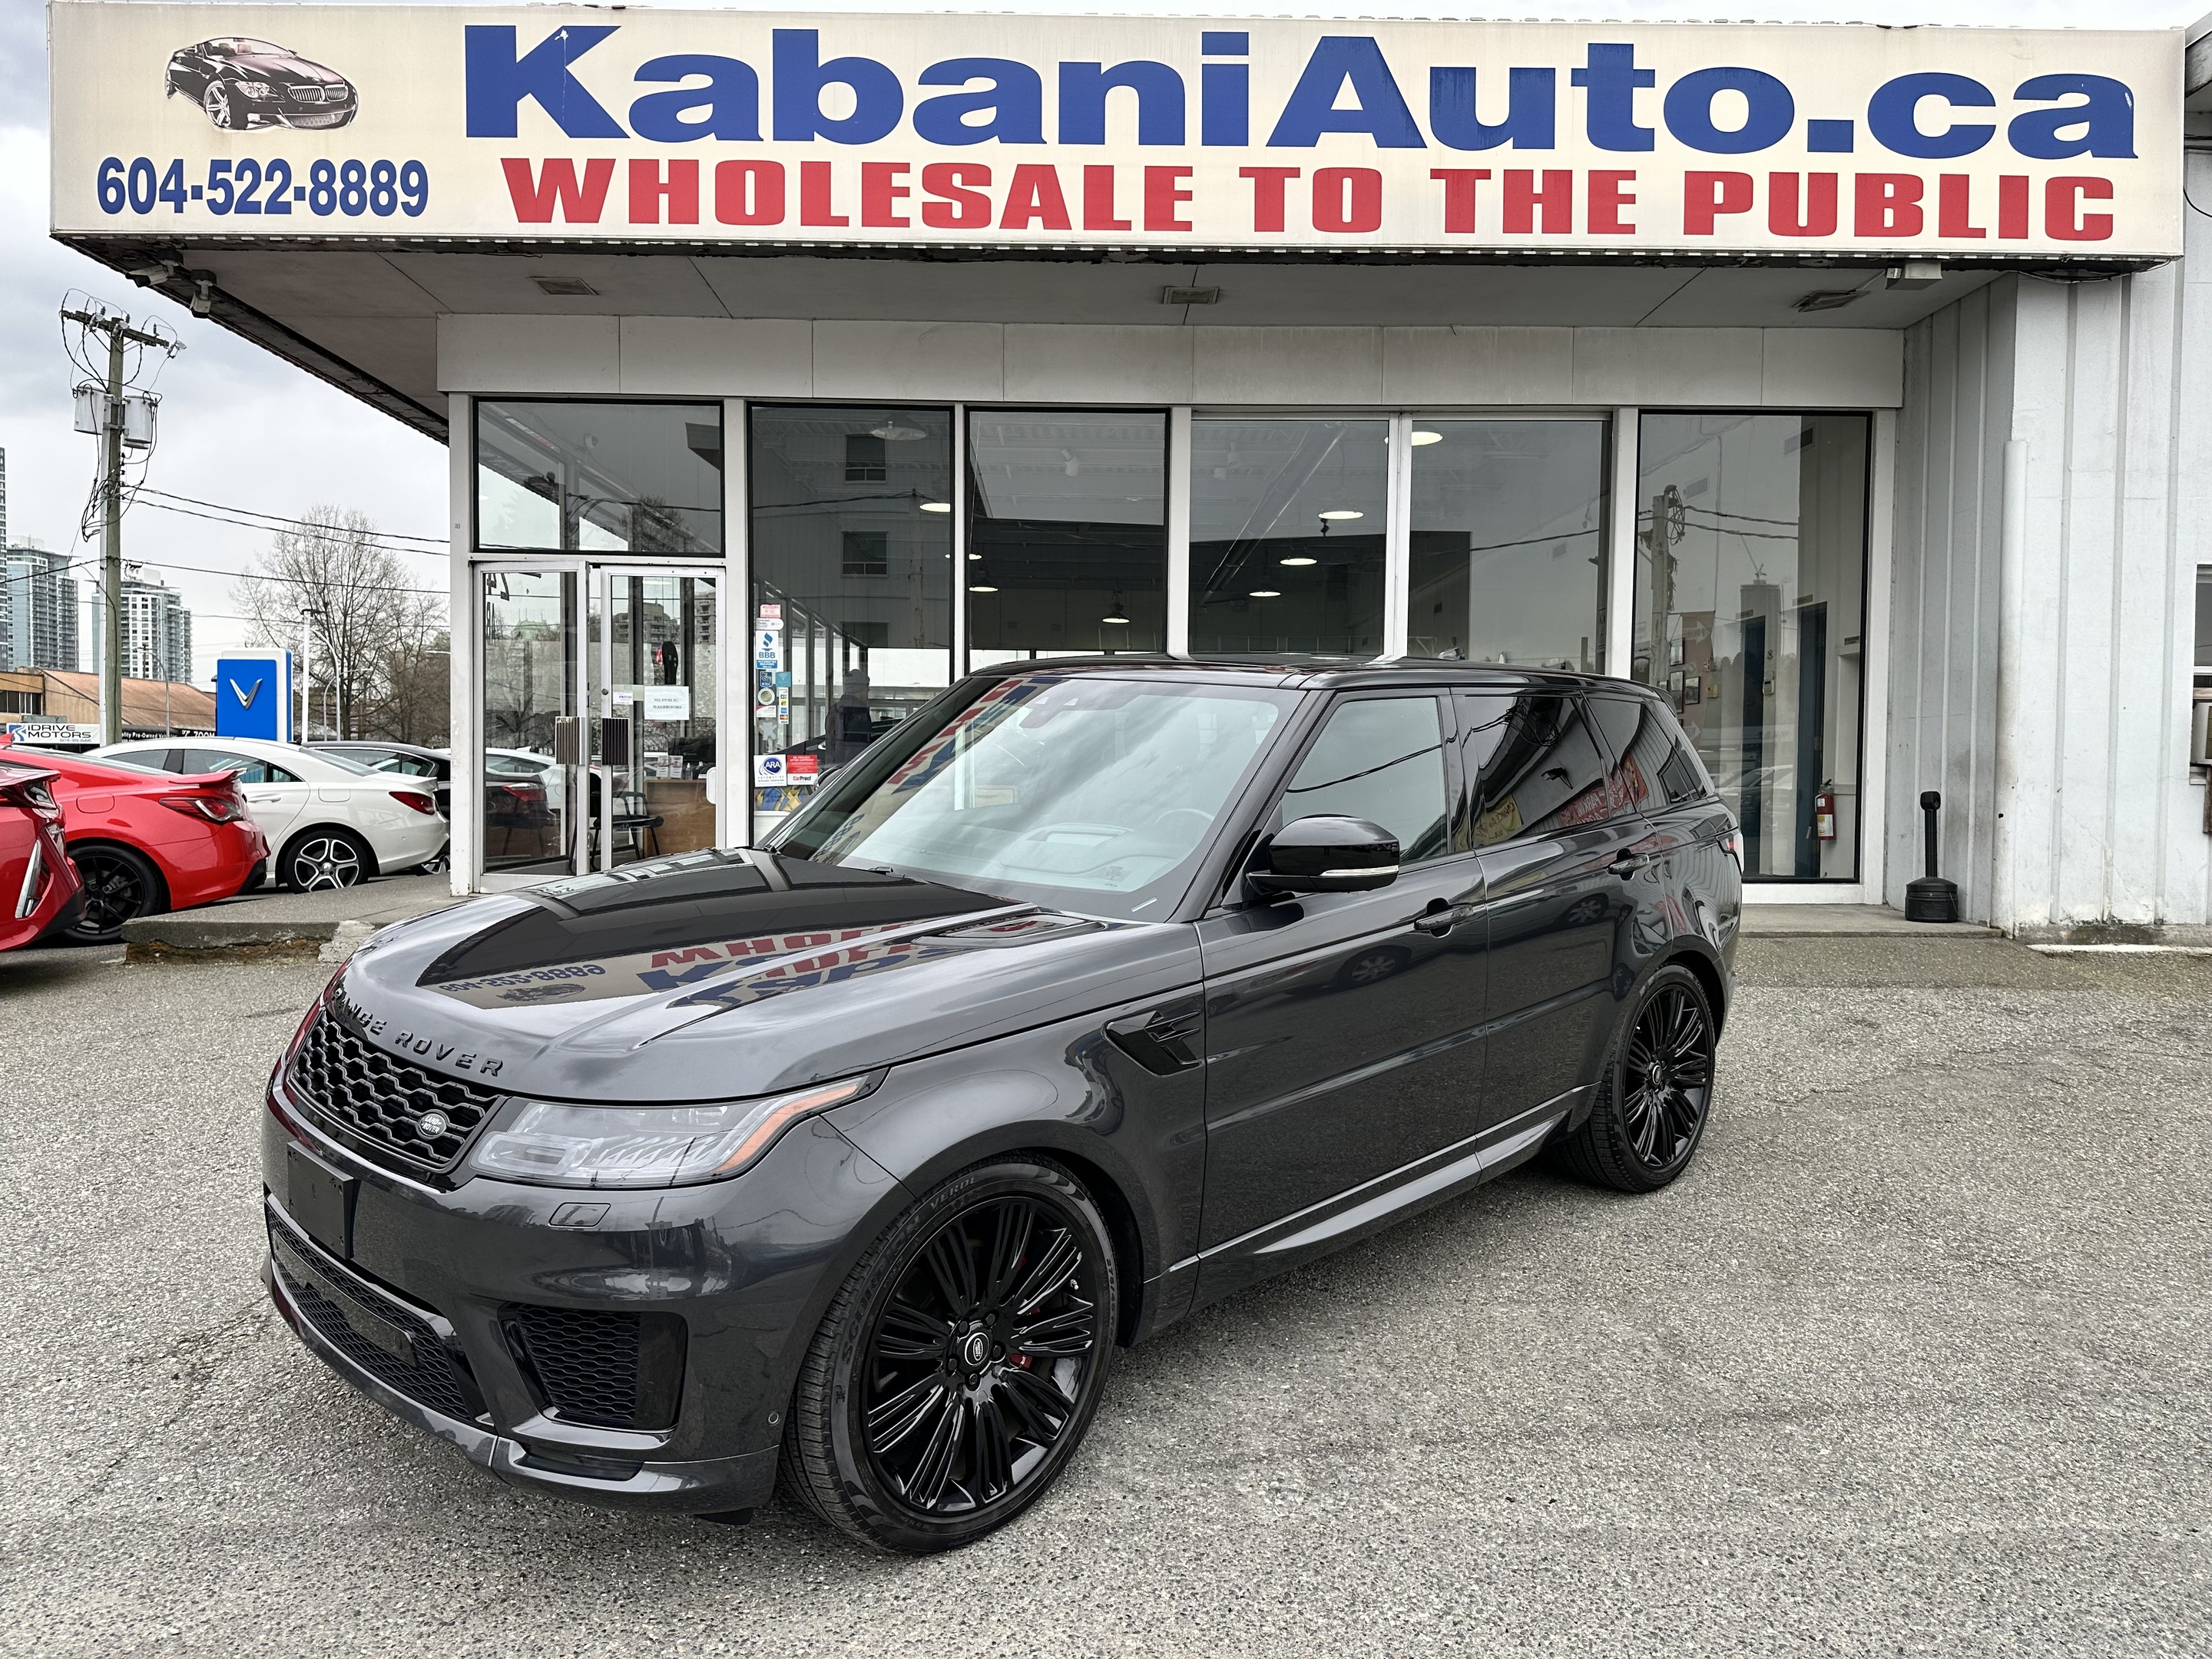 2019 Land Rover Range Rover Sport Supercharged Autobiography   FINANCING AVAILABLE!